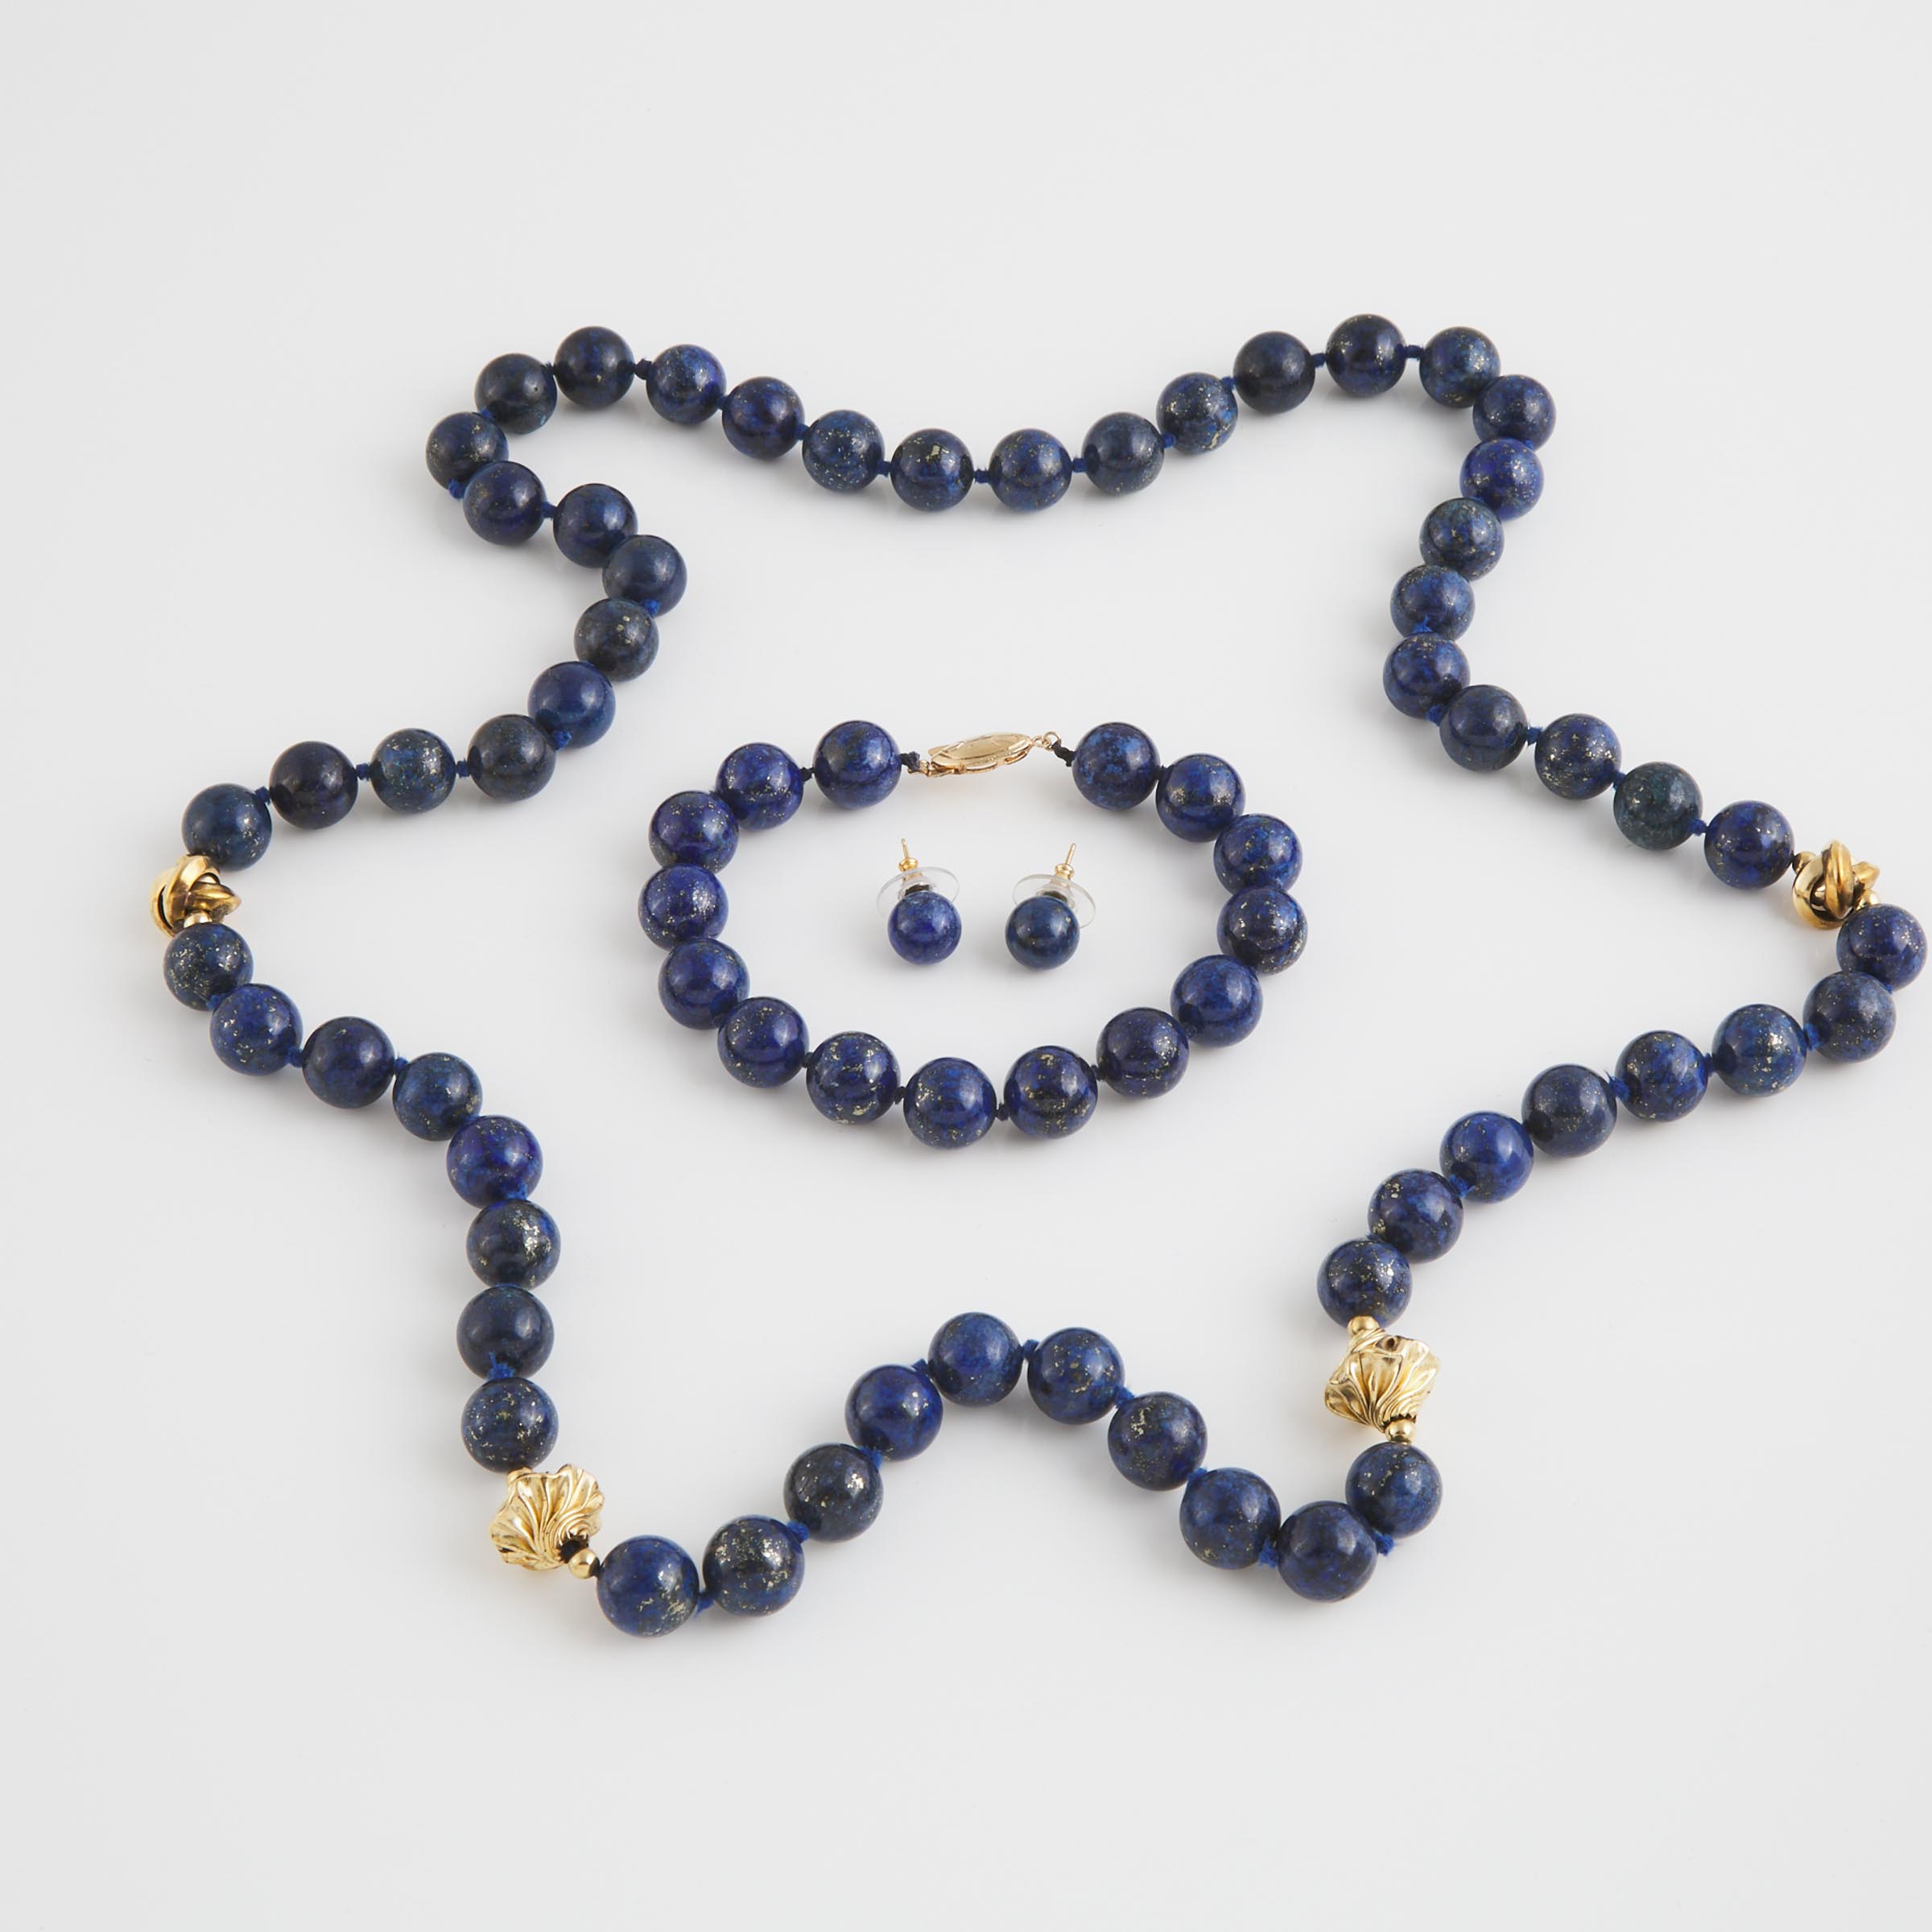 Lapis Bead Necklace, Bracelet And Earrings